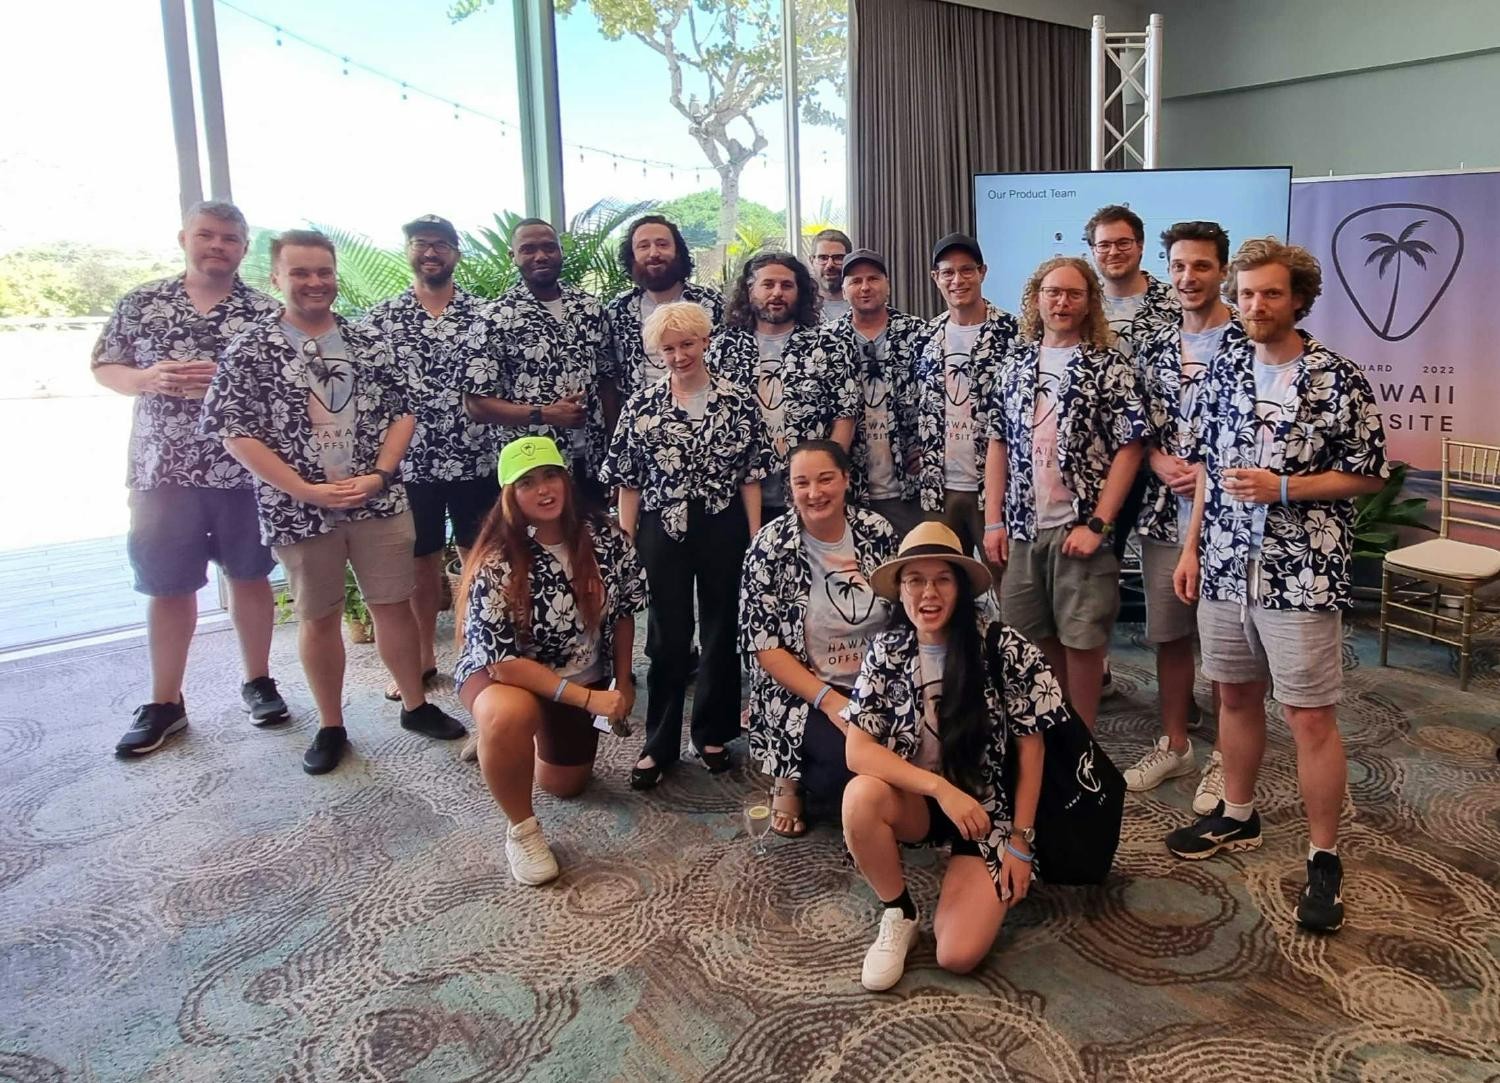 Our perfectly styled Product team during our Hawaiian Safari